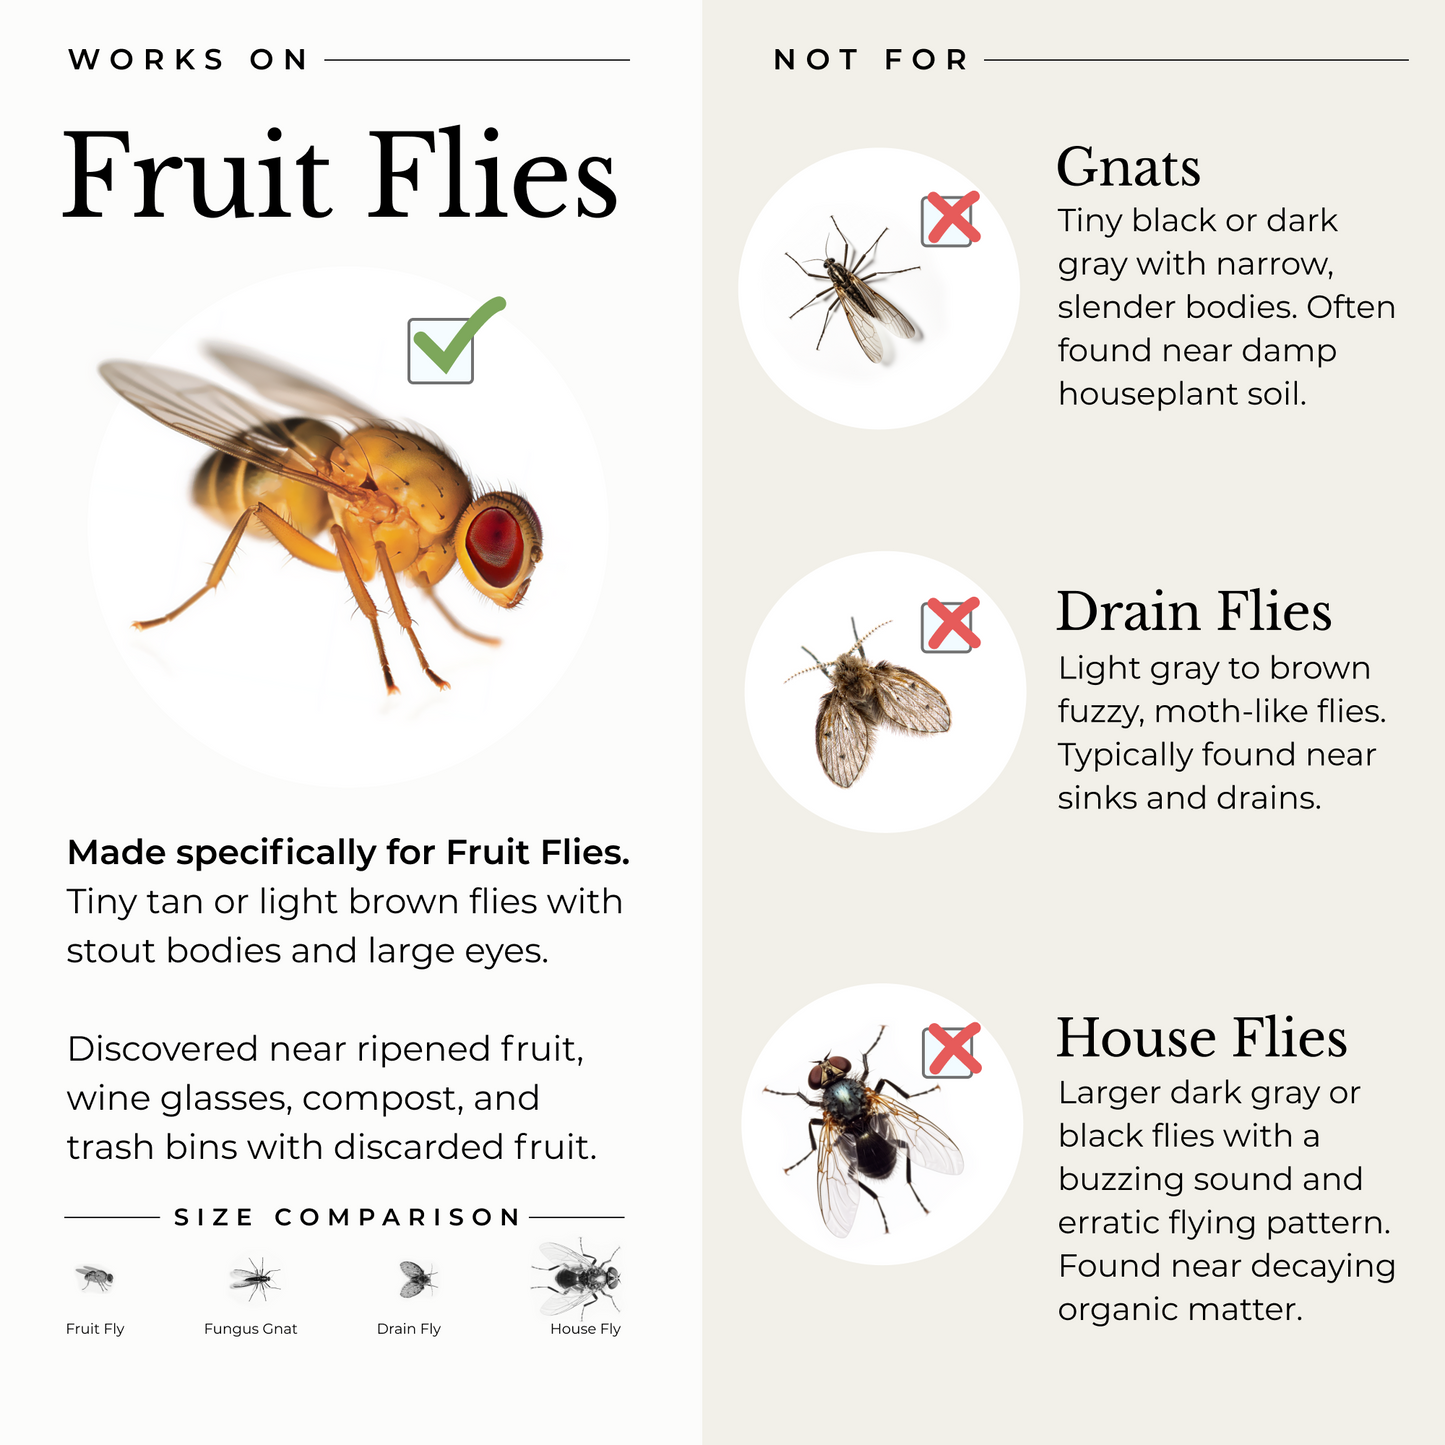 A comparison chart describing fruit flies versus other small flying insects. This product is designed for fruit flies specifically and not gnats, drain flies, or house flies. Fruit flies can be identified by their tiny tan or brown stout bodies with large eyes. They often are discovered around fruit, wine, compost, and trash.